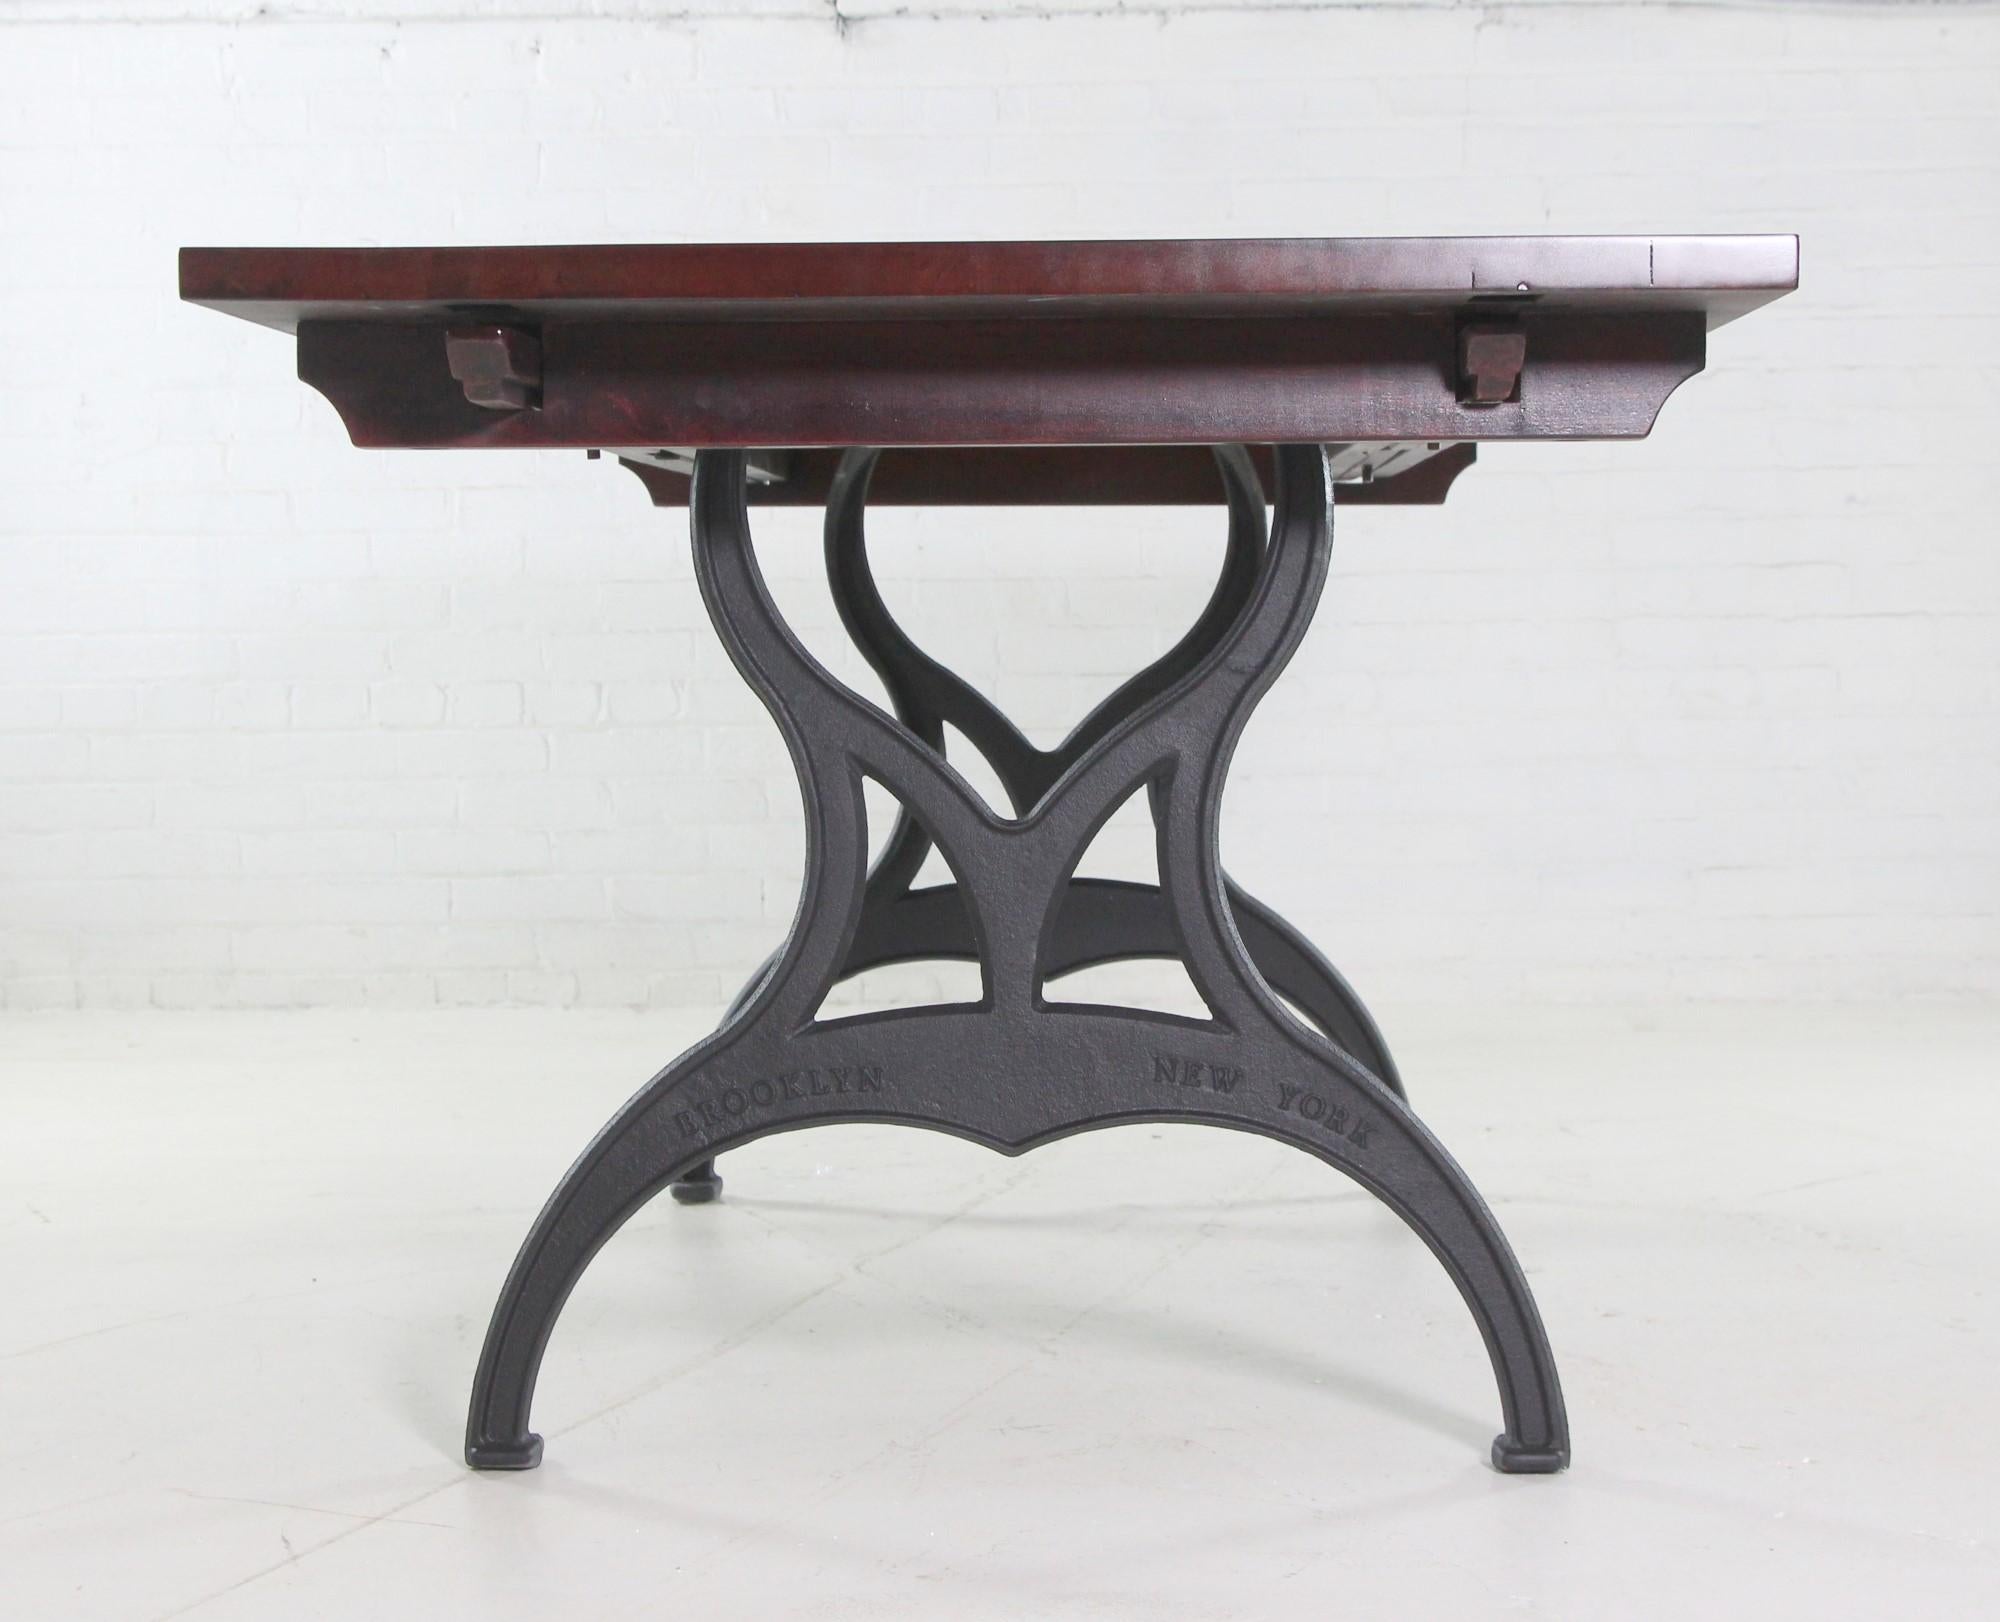 Red Mahogany Apitong Table w Extensions Cast Iron Legs Brooklyn, NY For Sale 5